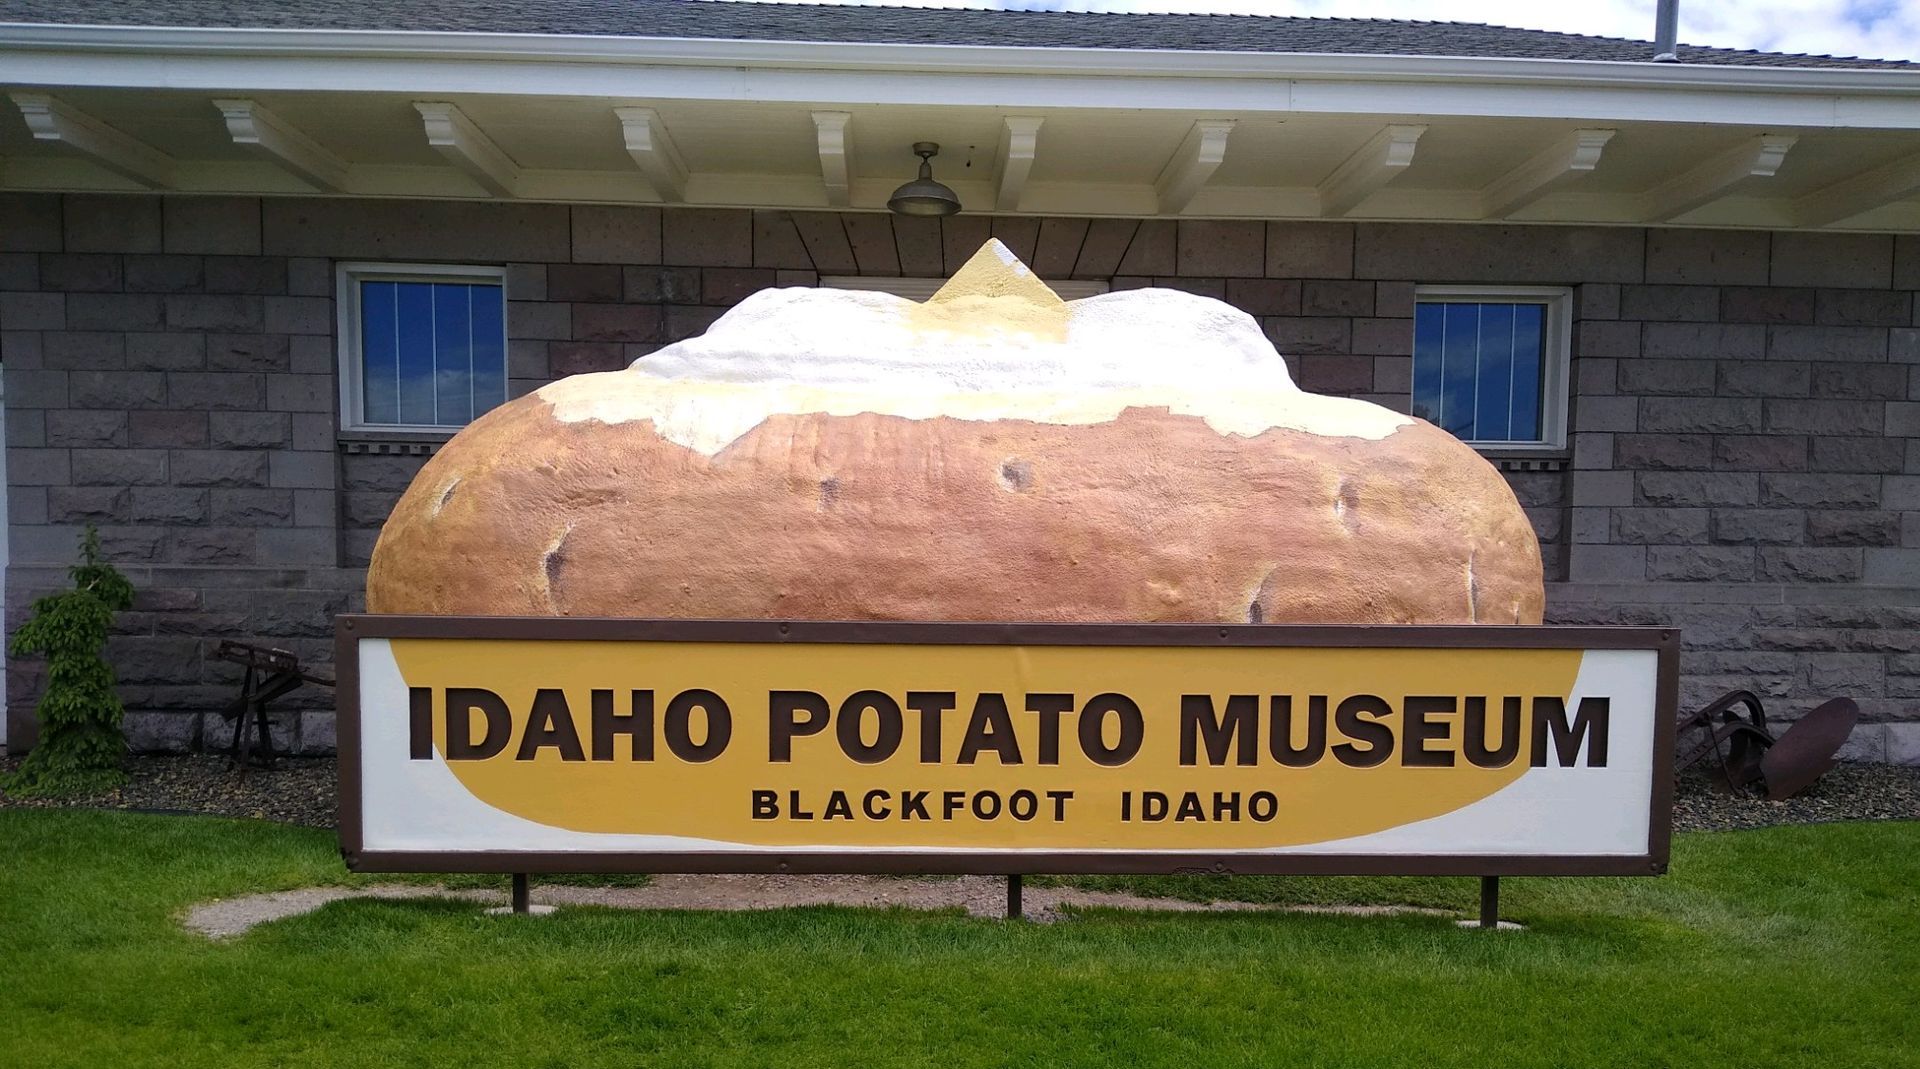 World's Largest Baked Potato with Topping Sculpture, world record in Blackfoot, Idaho
